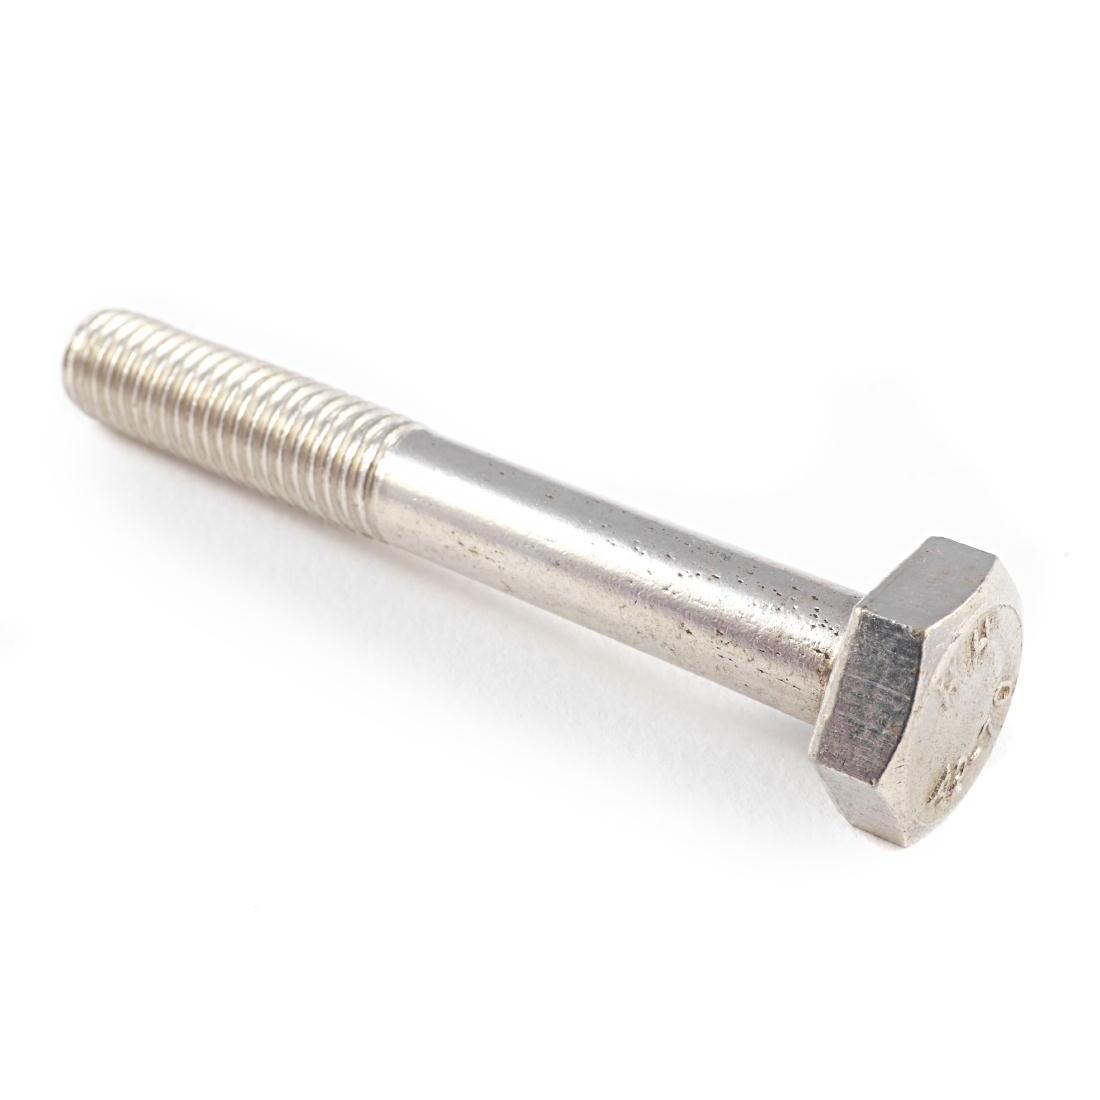 A2 Stainless Steel Bolt (M8 x 60) - AD778 - 1